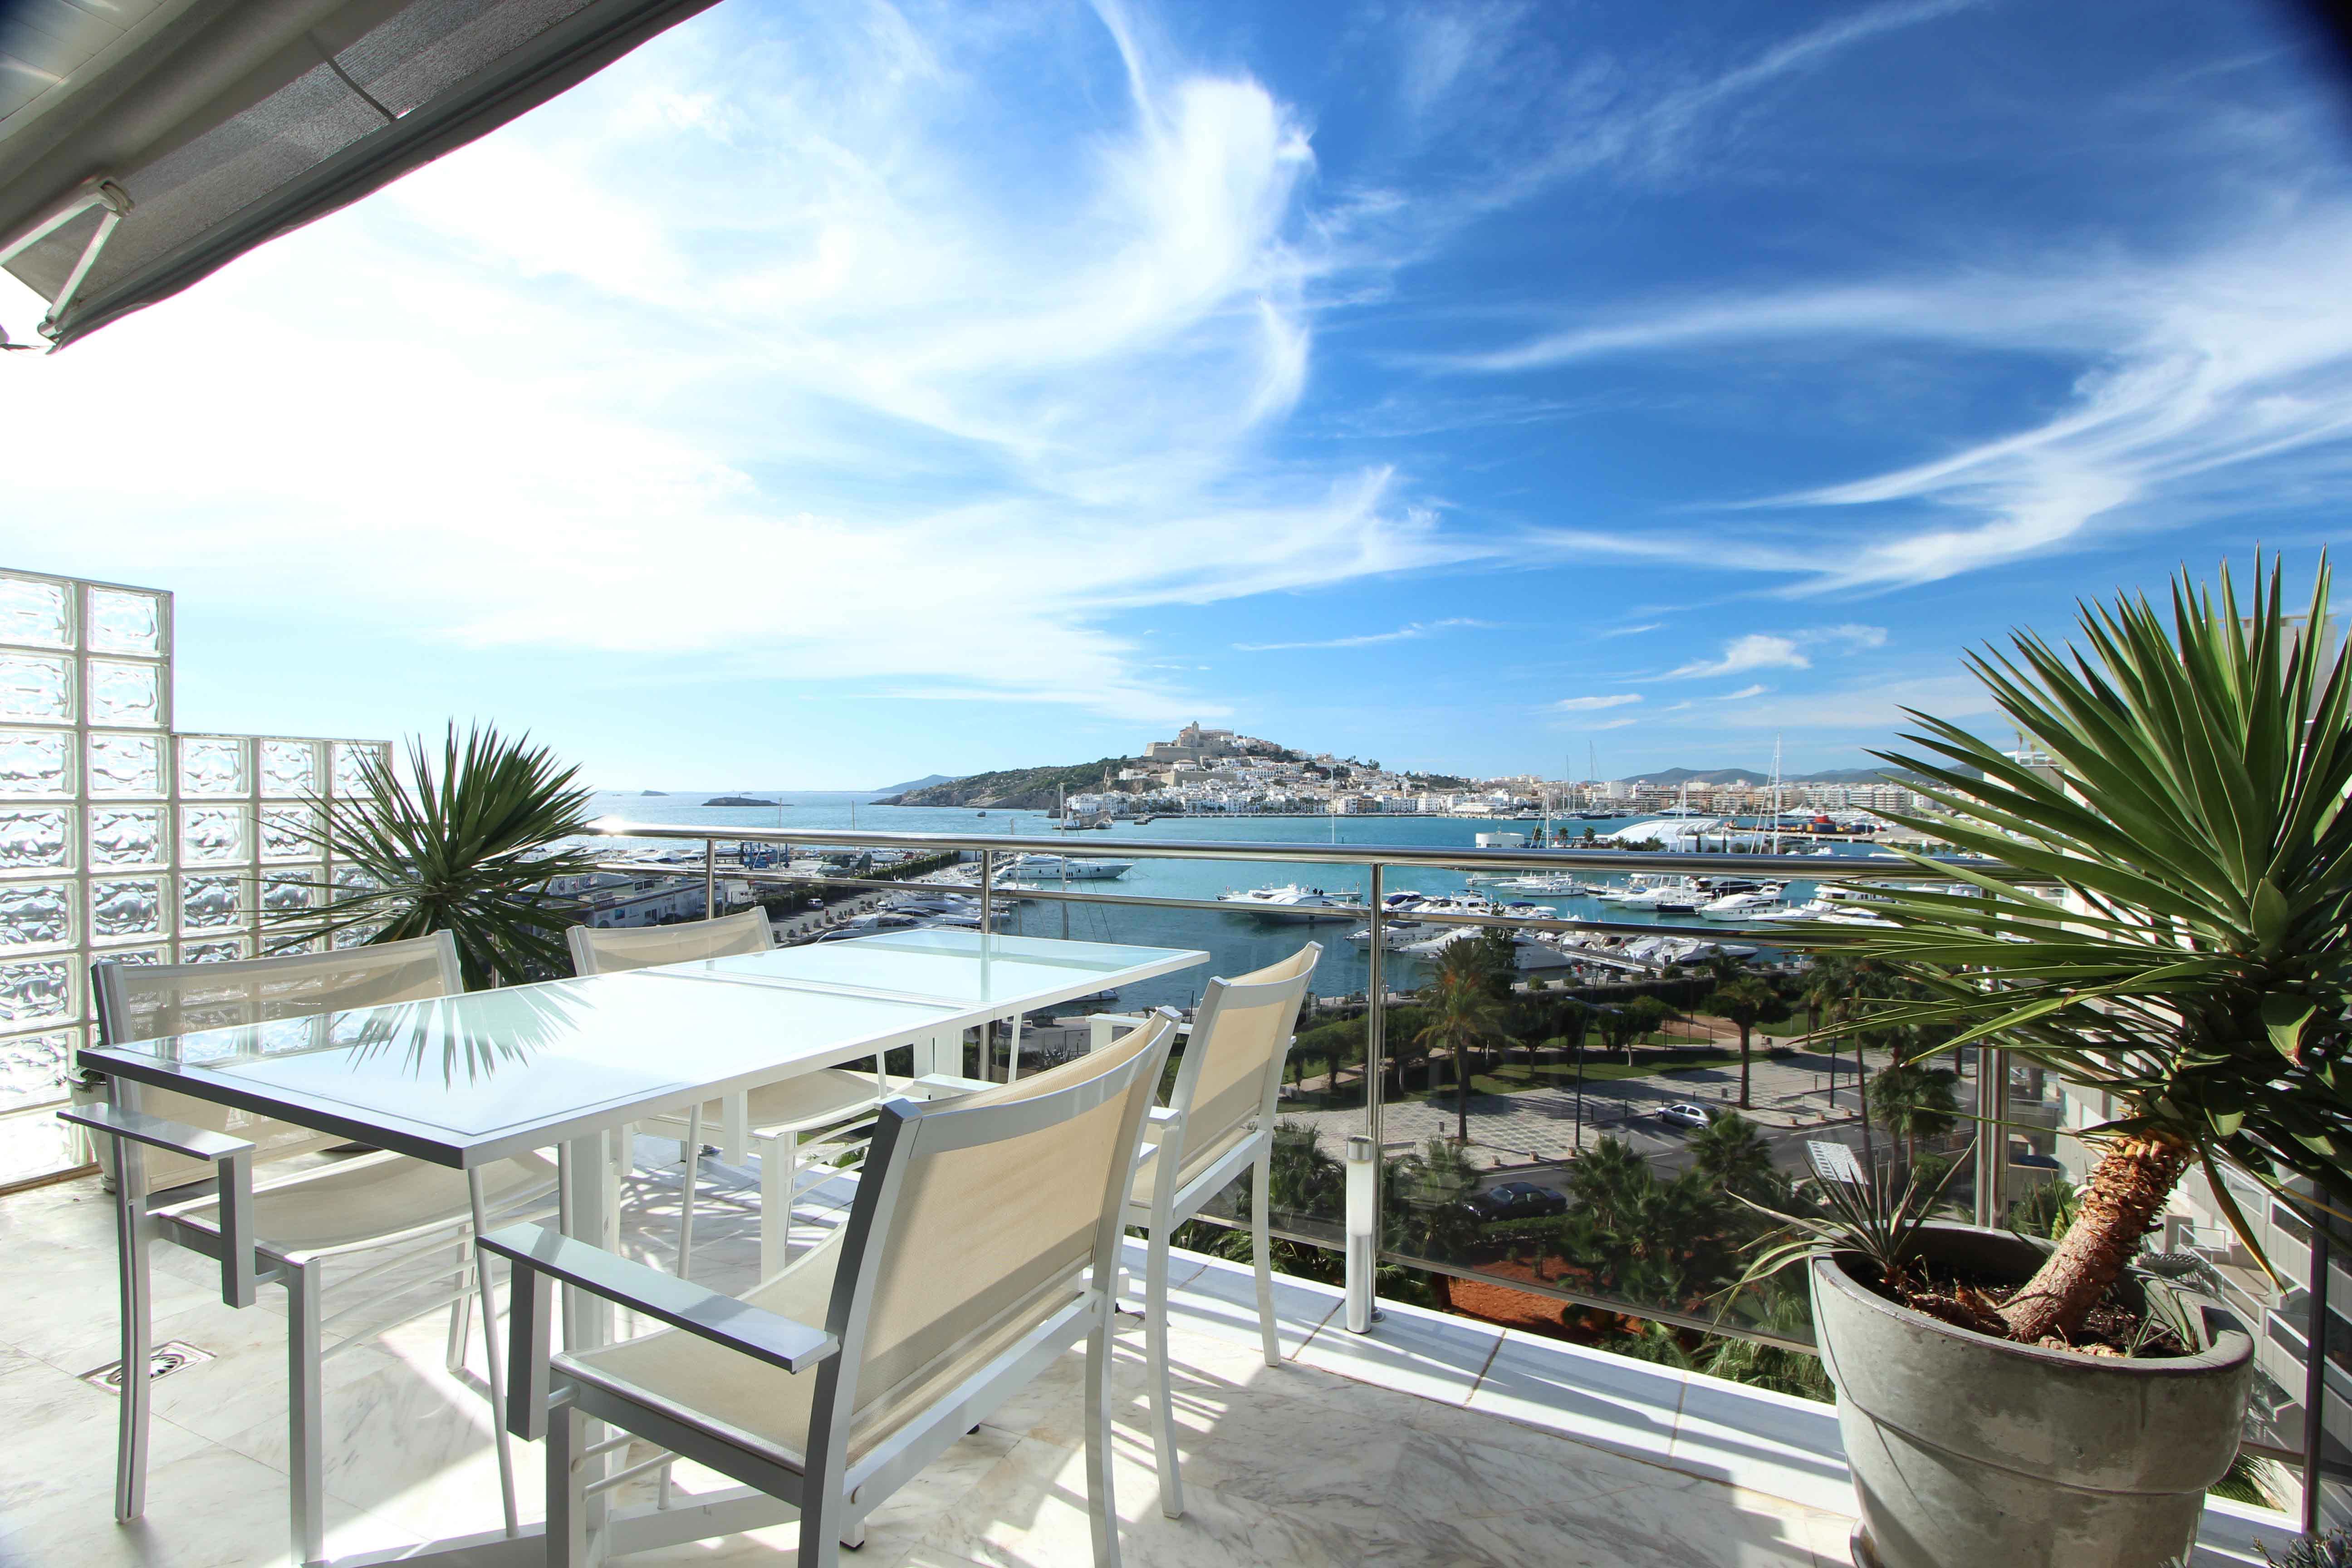 Ibiza as a possible destination for your next trip